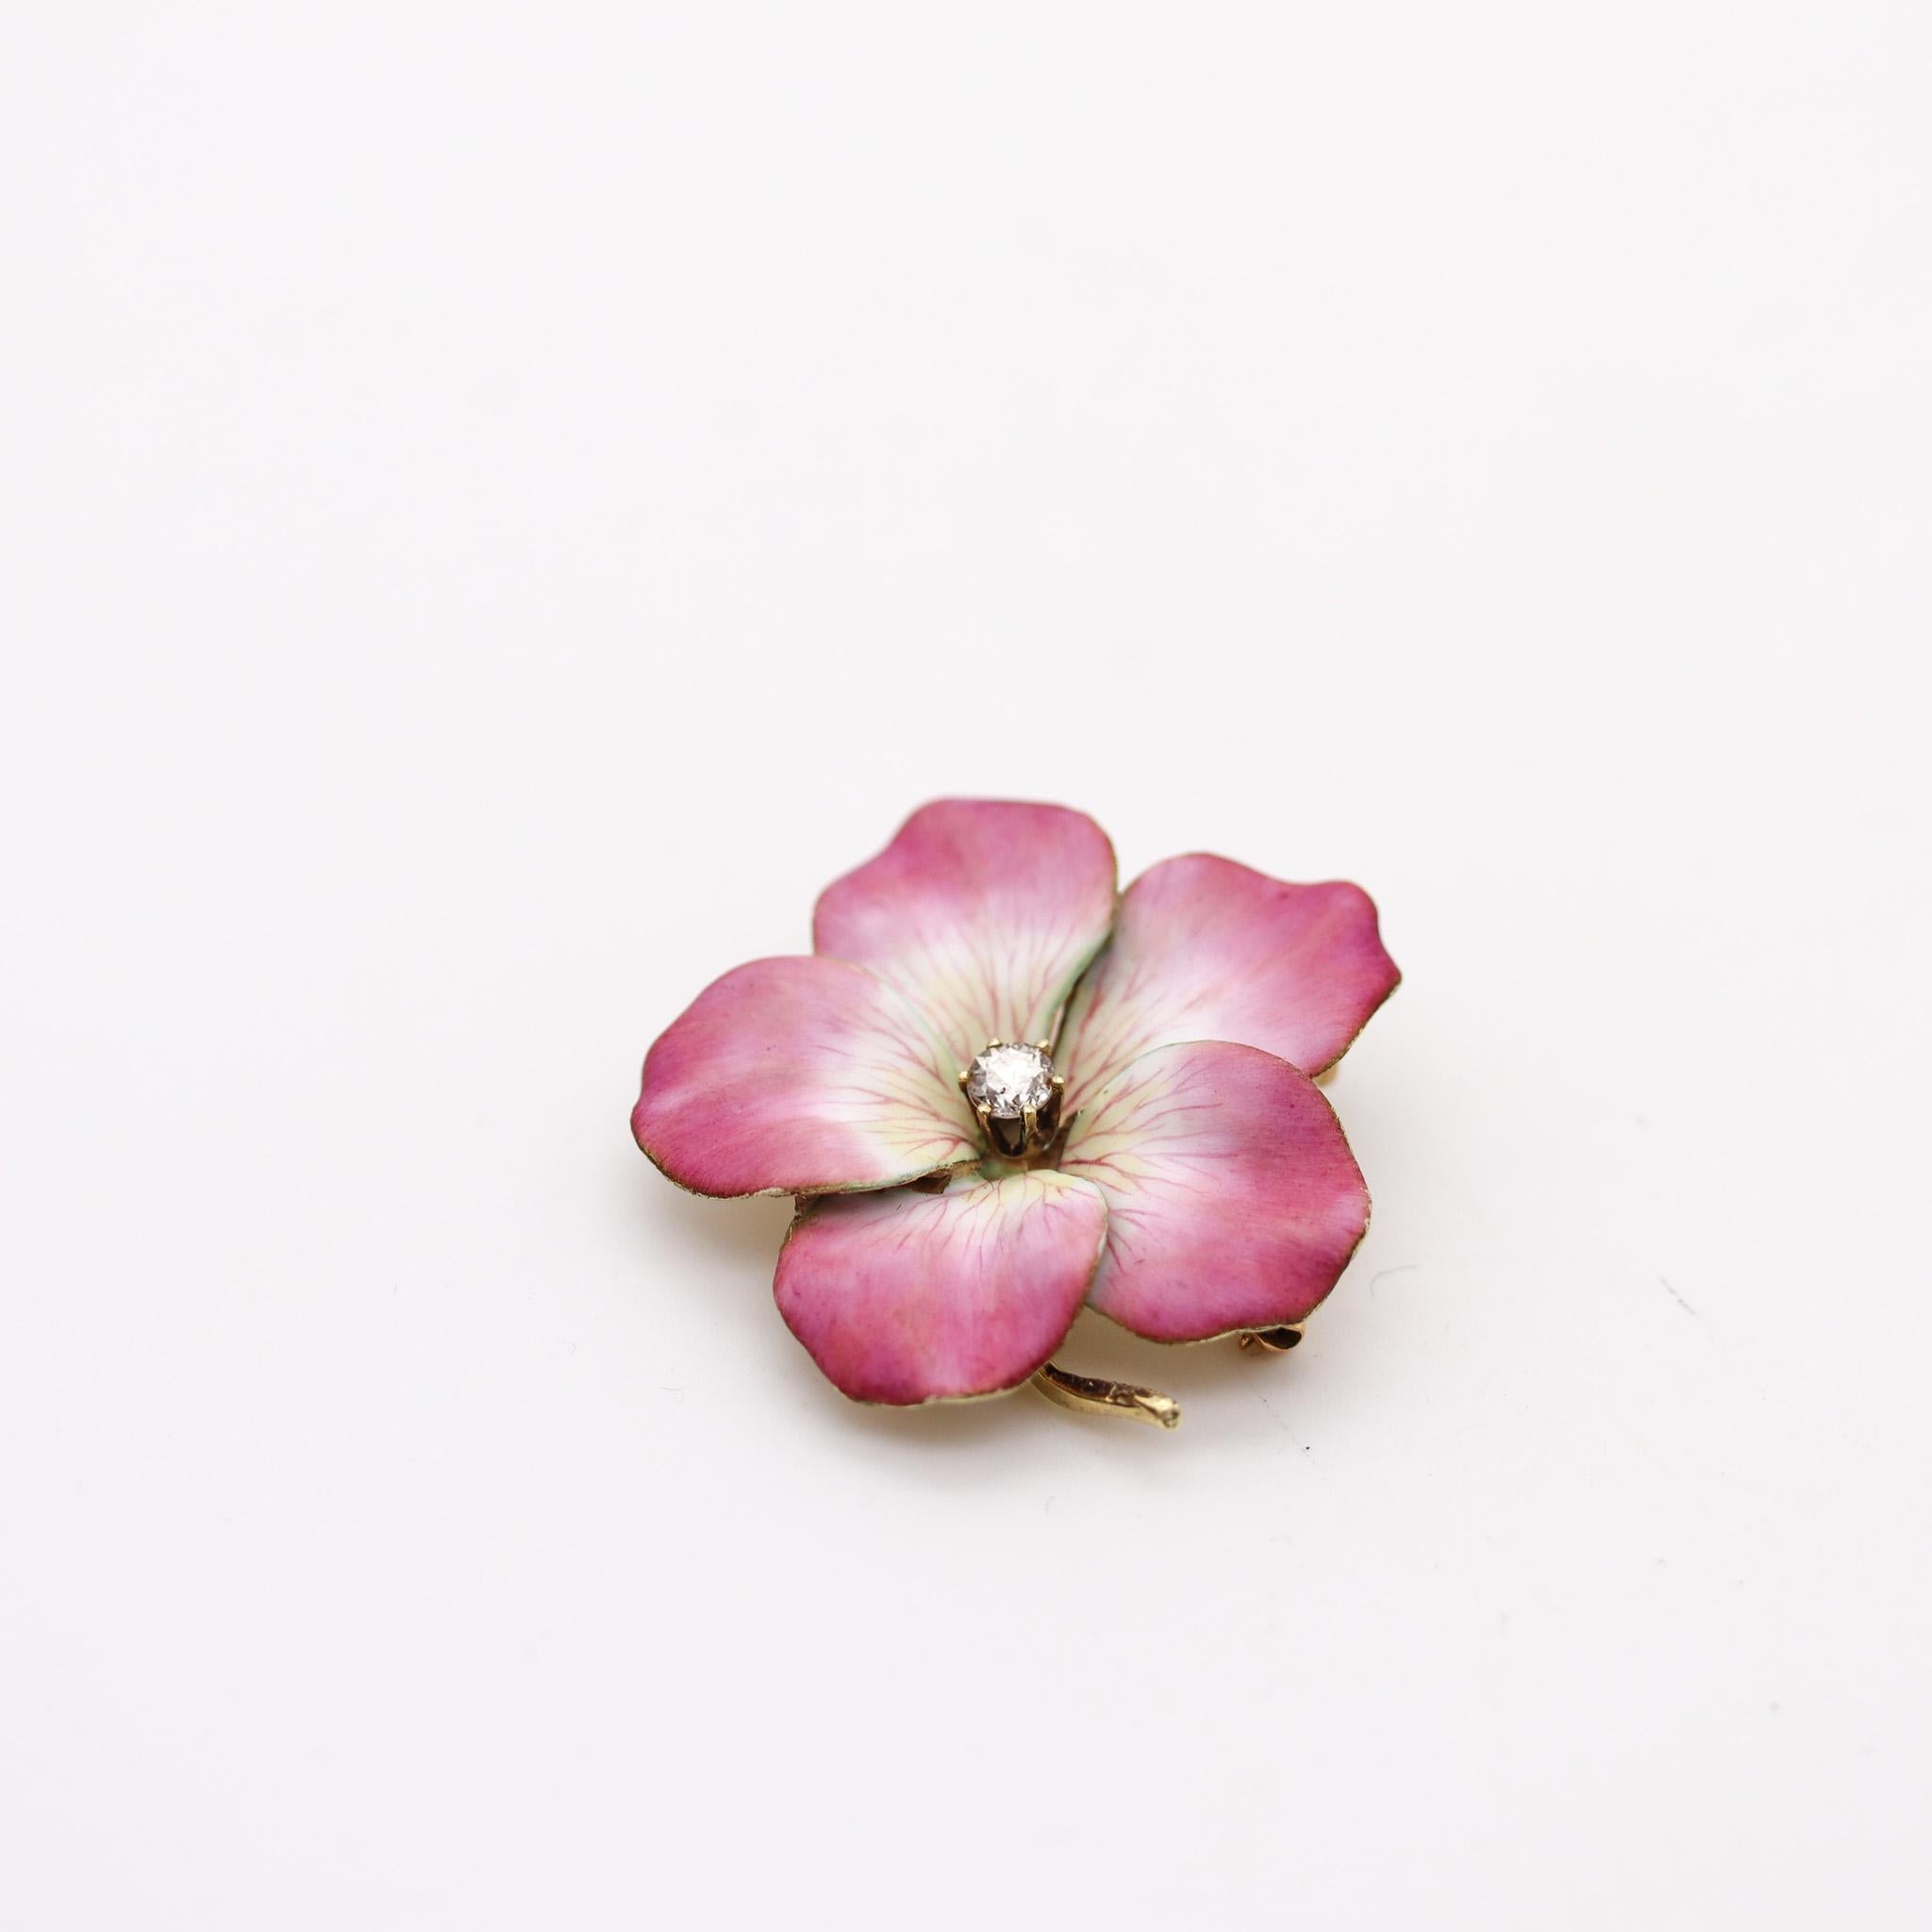 Edwardian enameled convertible flower brooch.

Beautiful three-dimensional five-petals flower, created in America during the Edwardian and the Art Nouveau periods, back between the 1900-1910. This large convertible pendant-brooch has been carefully